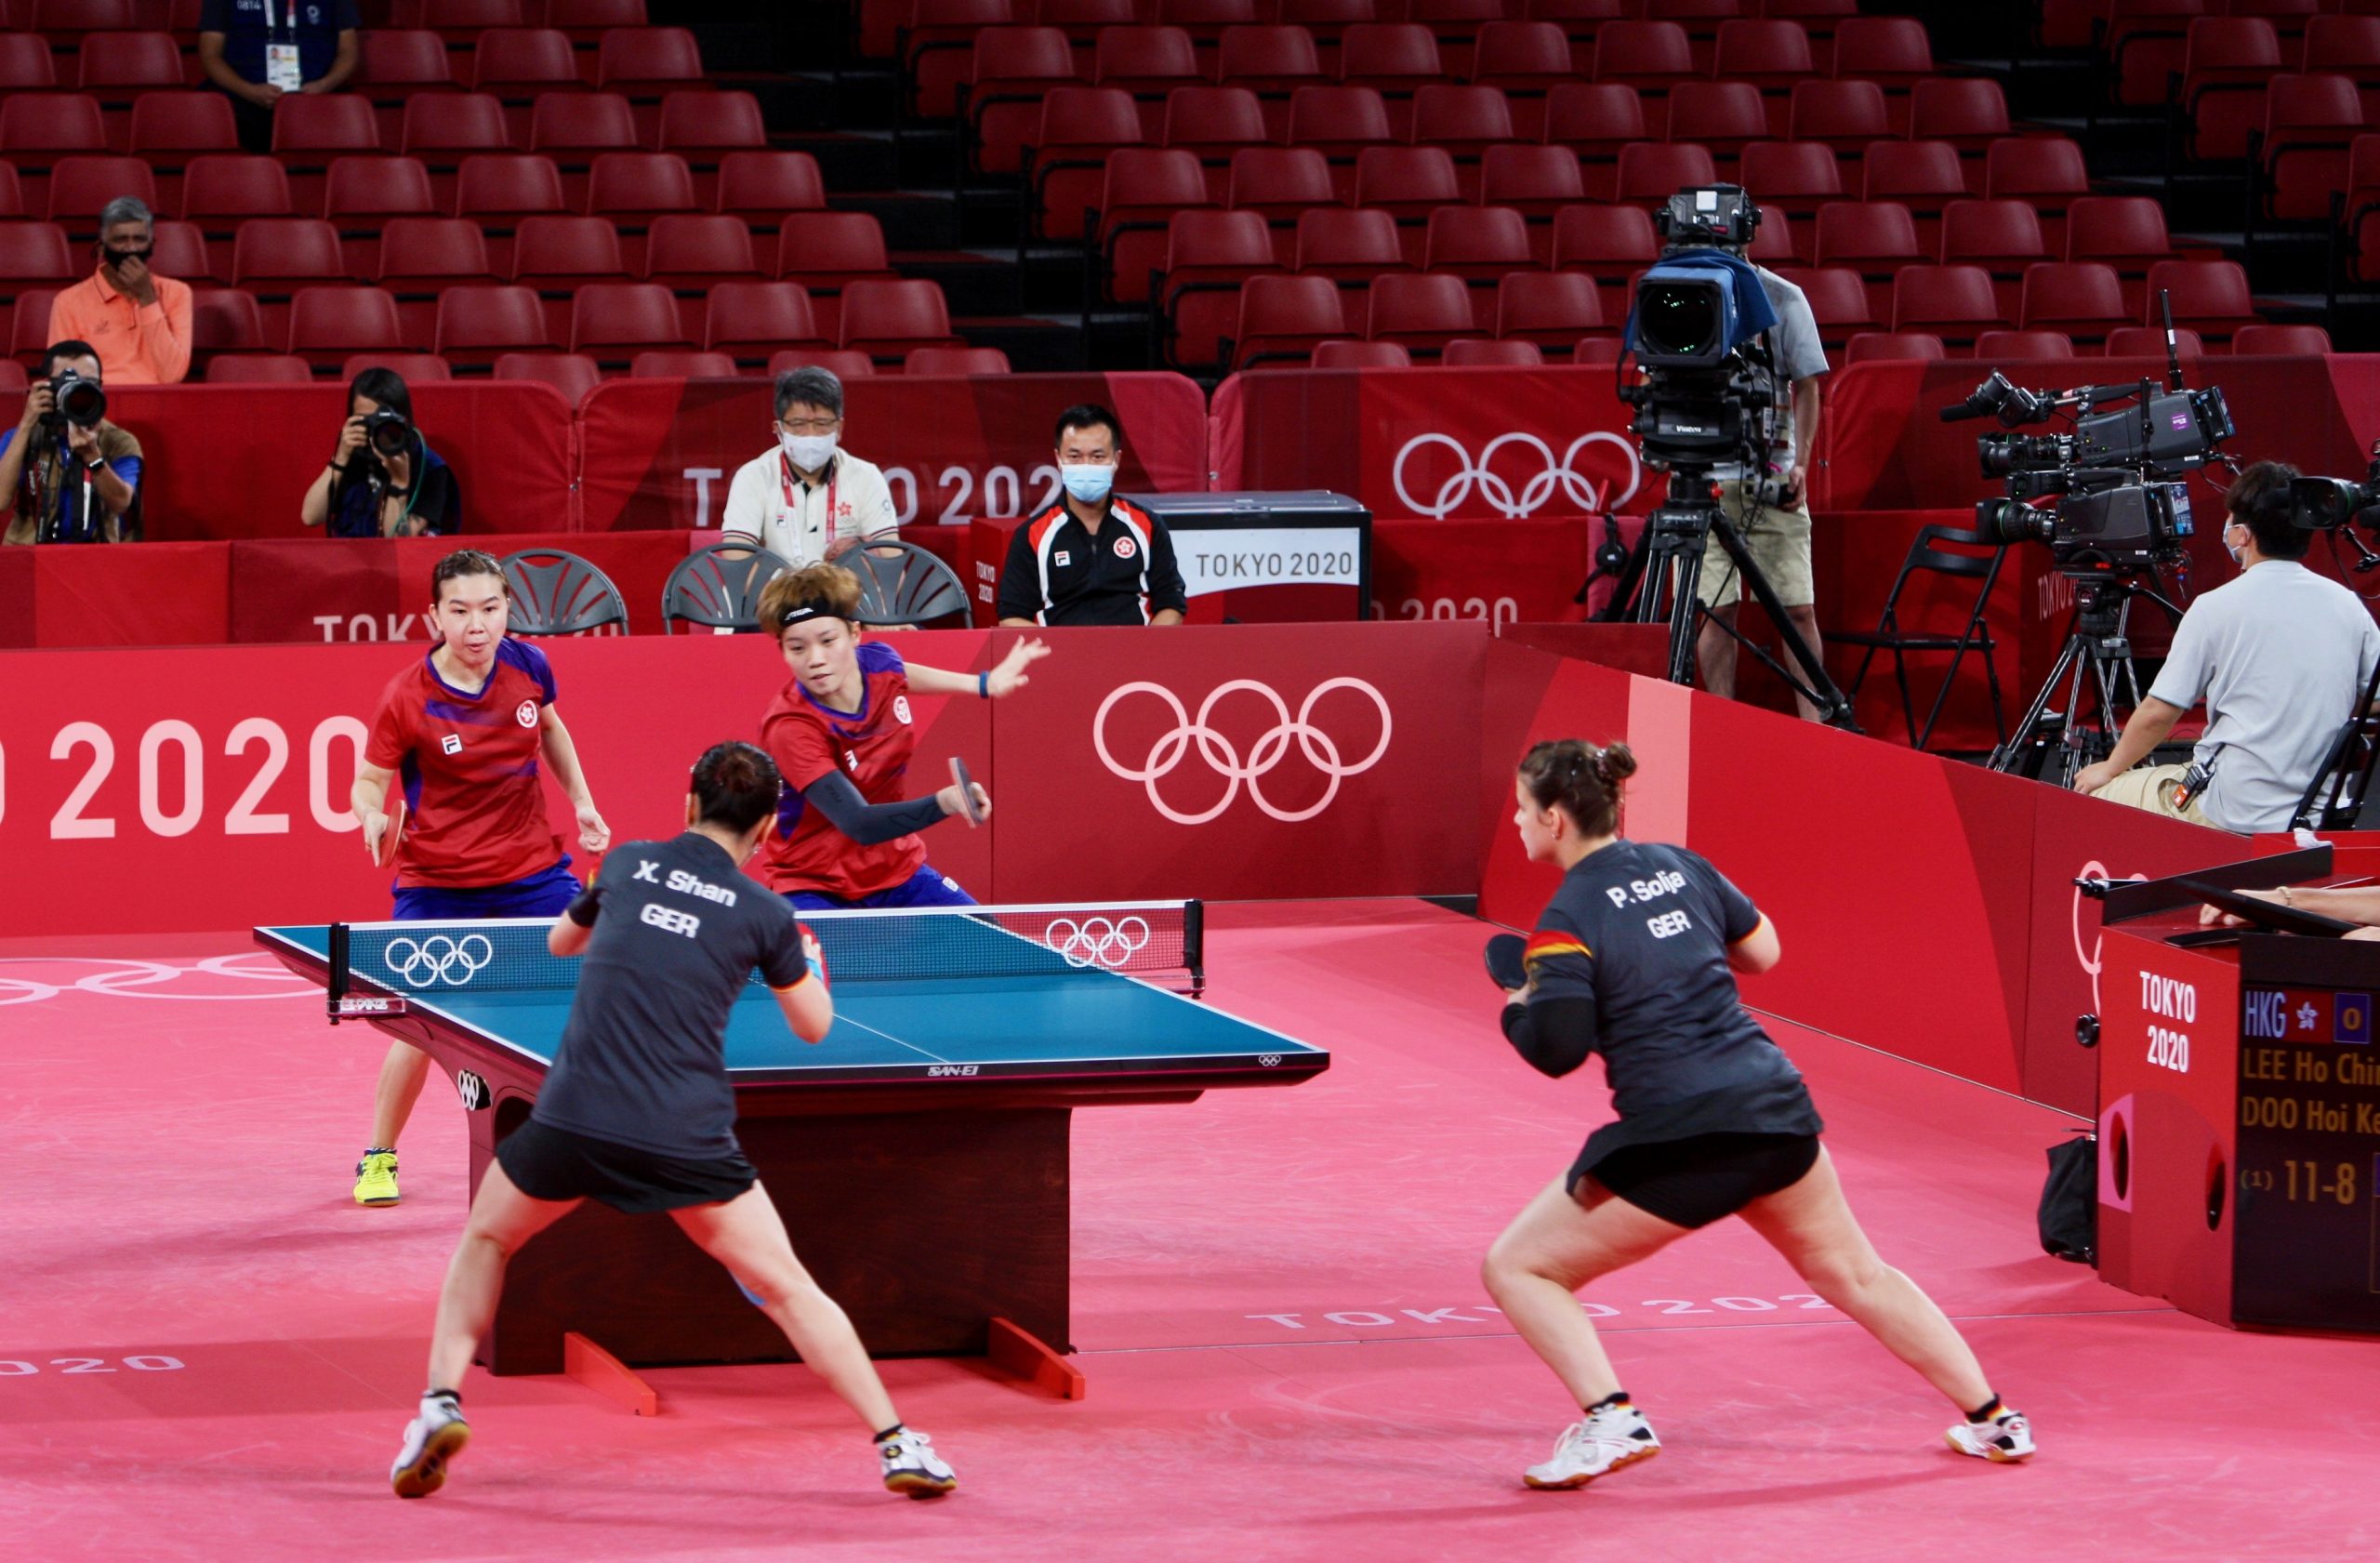 Live from Tokyo Olympics Table Tennis at the Tokyo Metropolitan